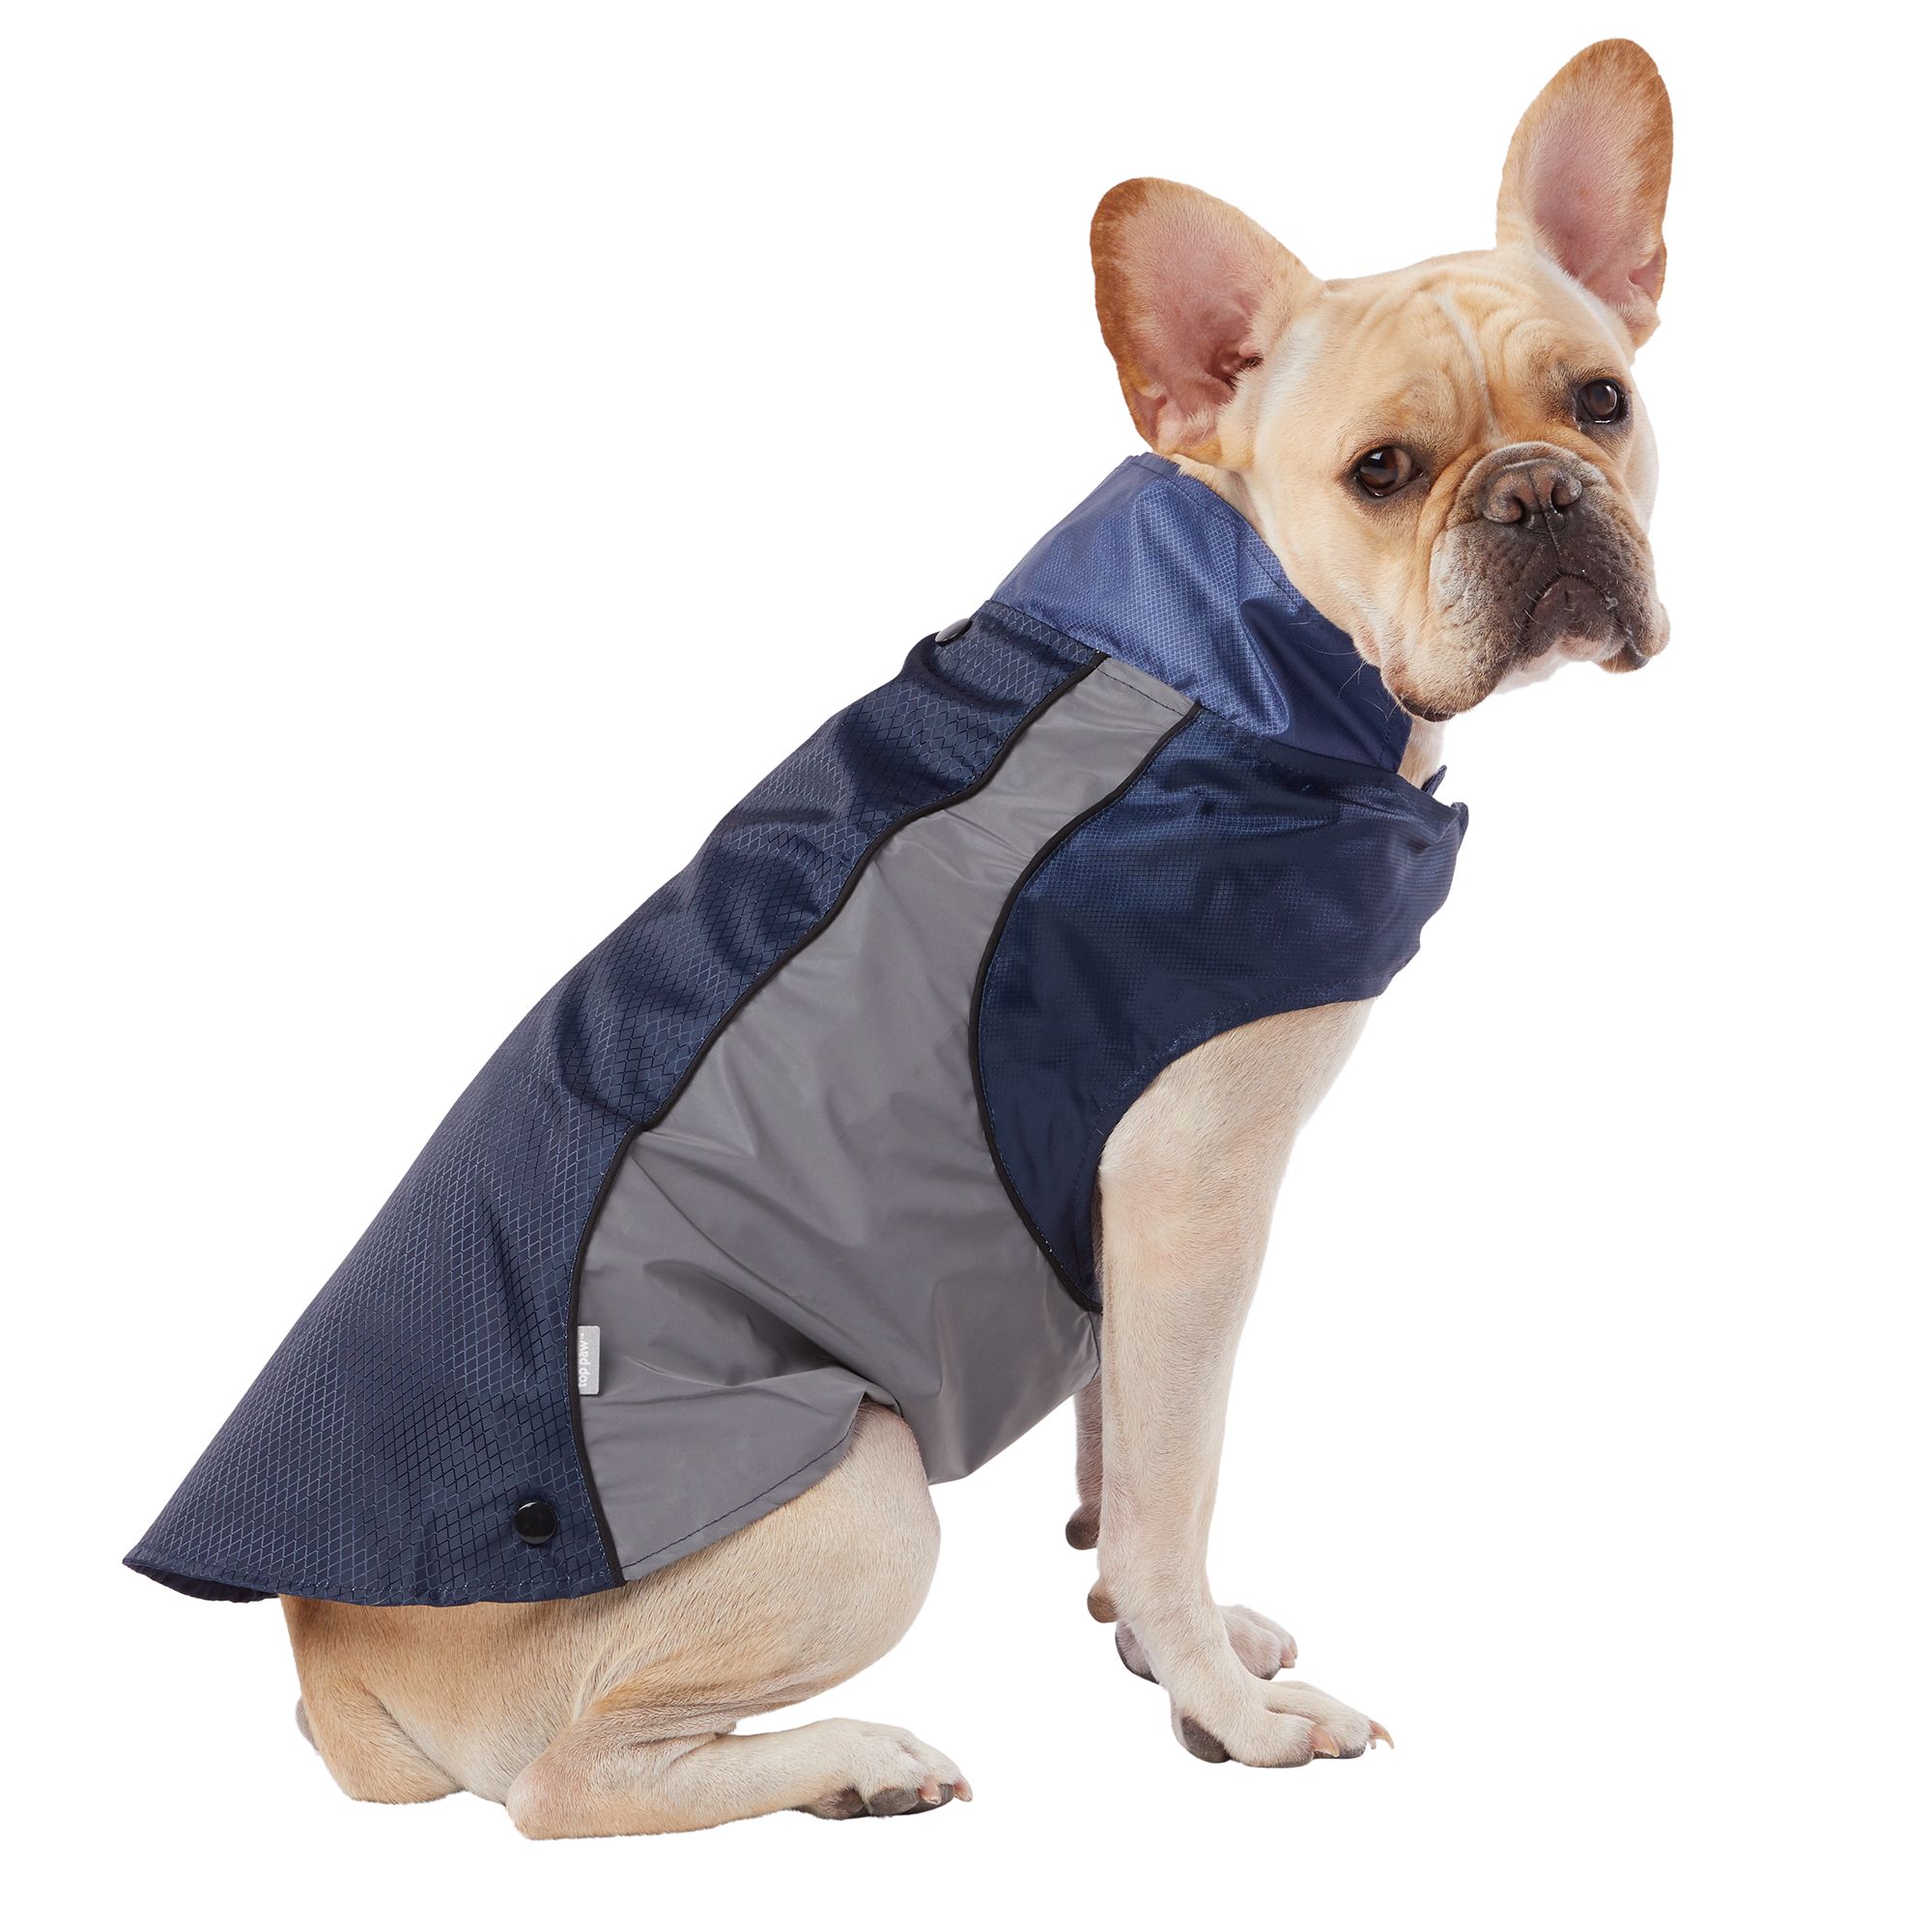 petsmart clothes - Online Discount Shop for Electronics, Apparel, Toys, Books, Games, Computers, Shoes, Jewelry, Watches, Baby Products, Sports & Outdoors, Office Products, Bed & Bath, Furniture, Tools, Hardware, Automotive Parts, Accessories